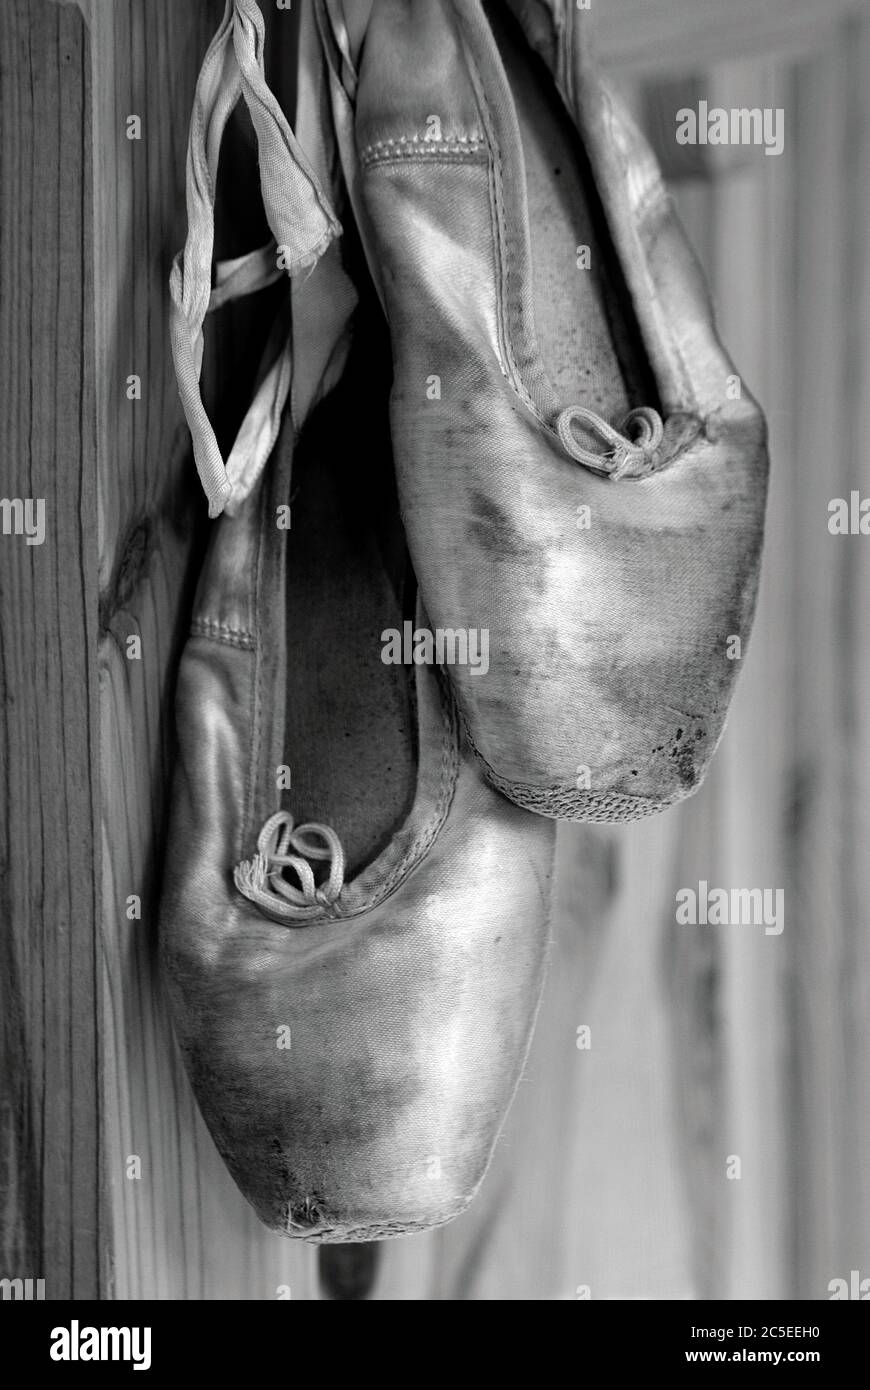 A pair of worn out ballet shoes. Stock Photo